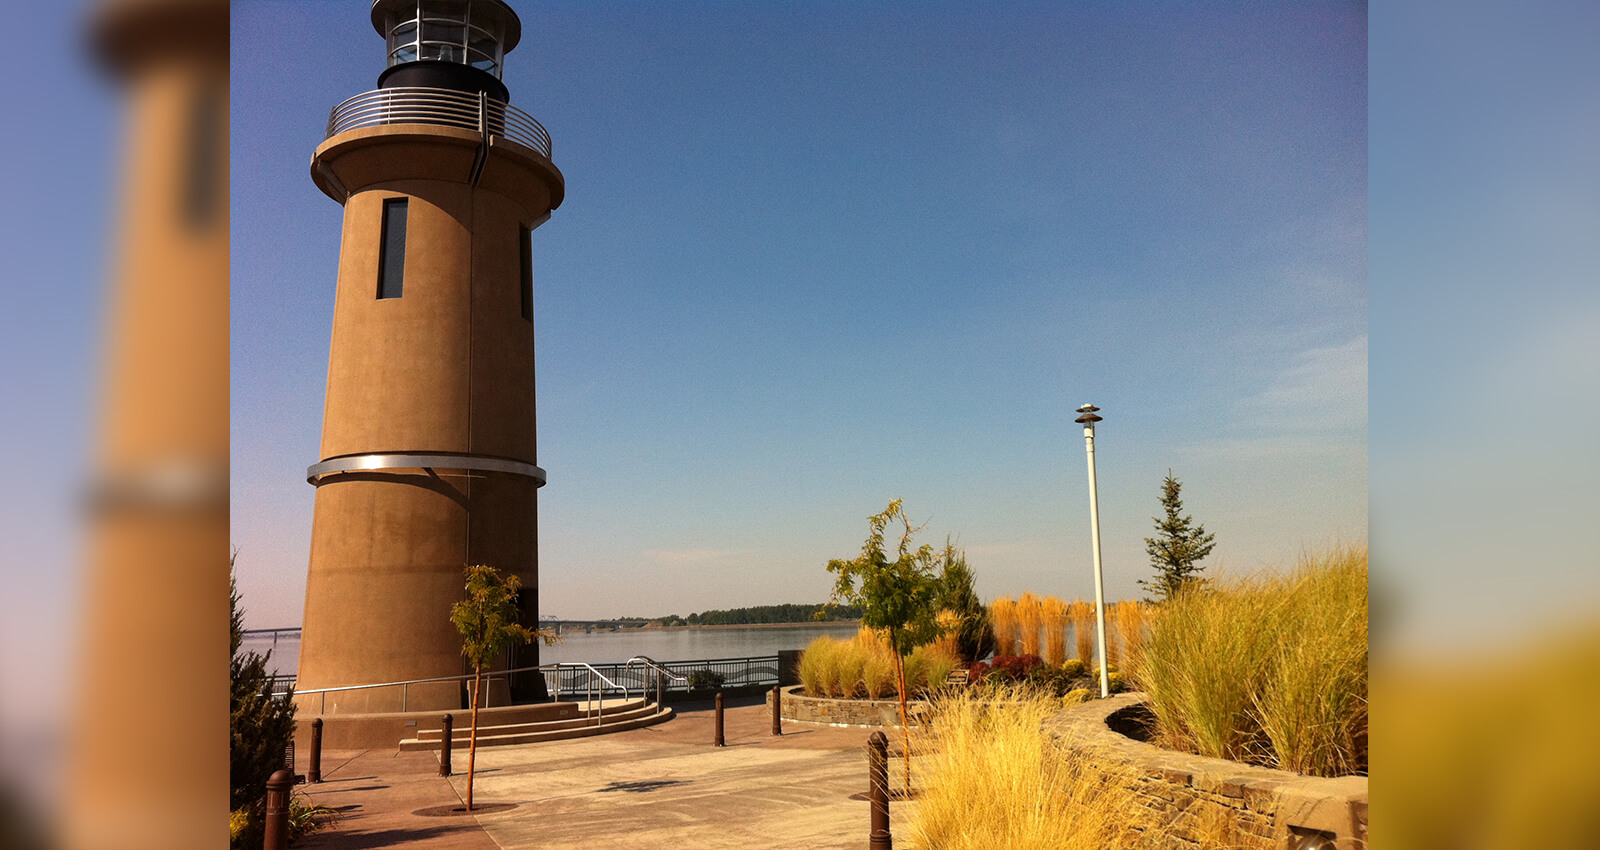 Clover Island Lighthouse and Lighthouse Plaza in fall.